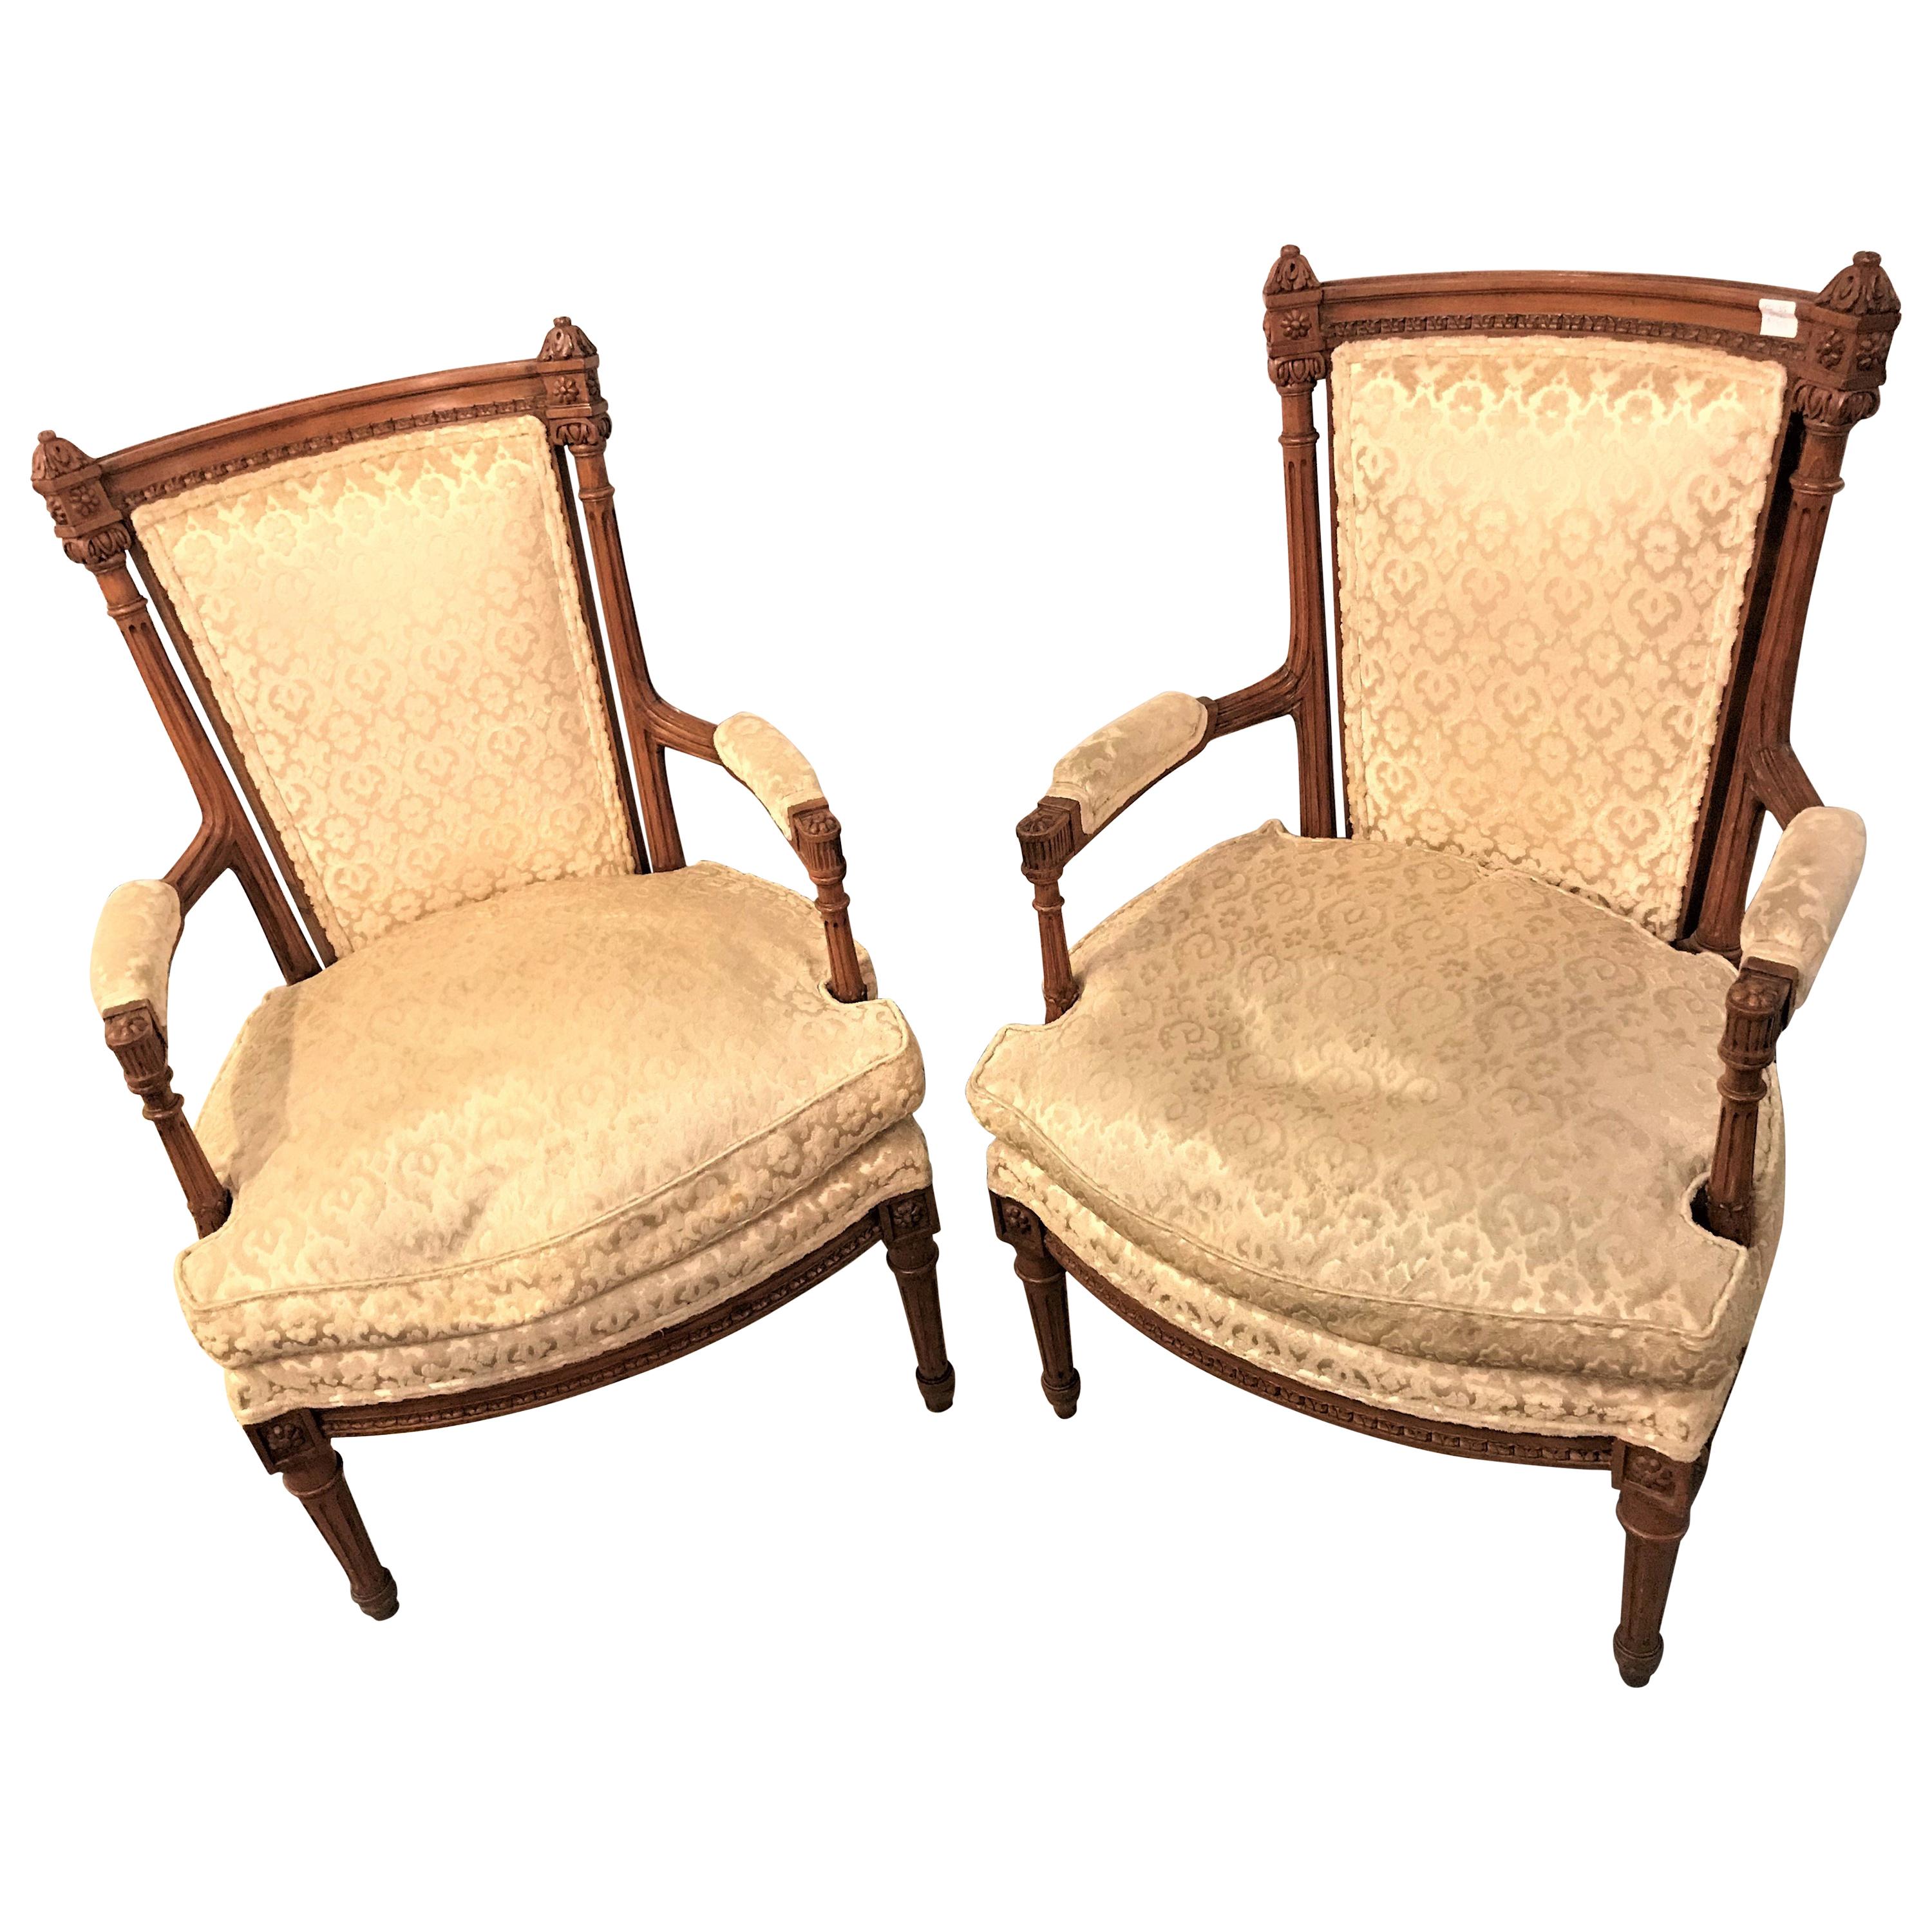 Pair of Louis XVI Style Bergere Chairs or Armchairs